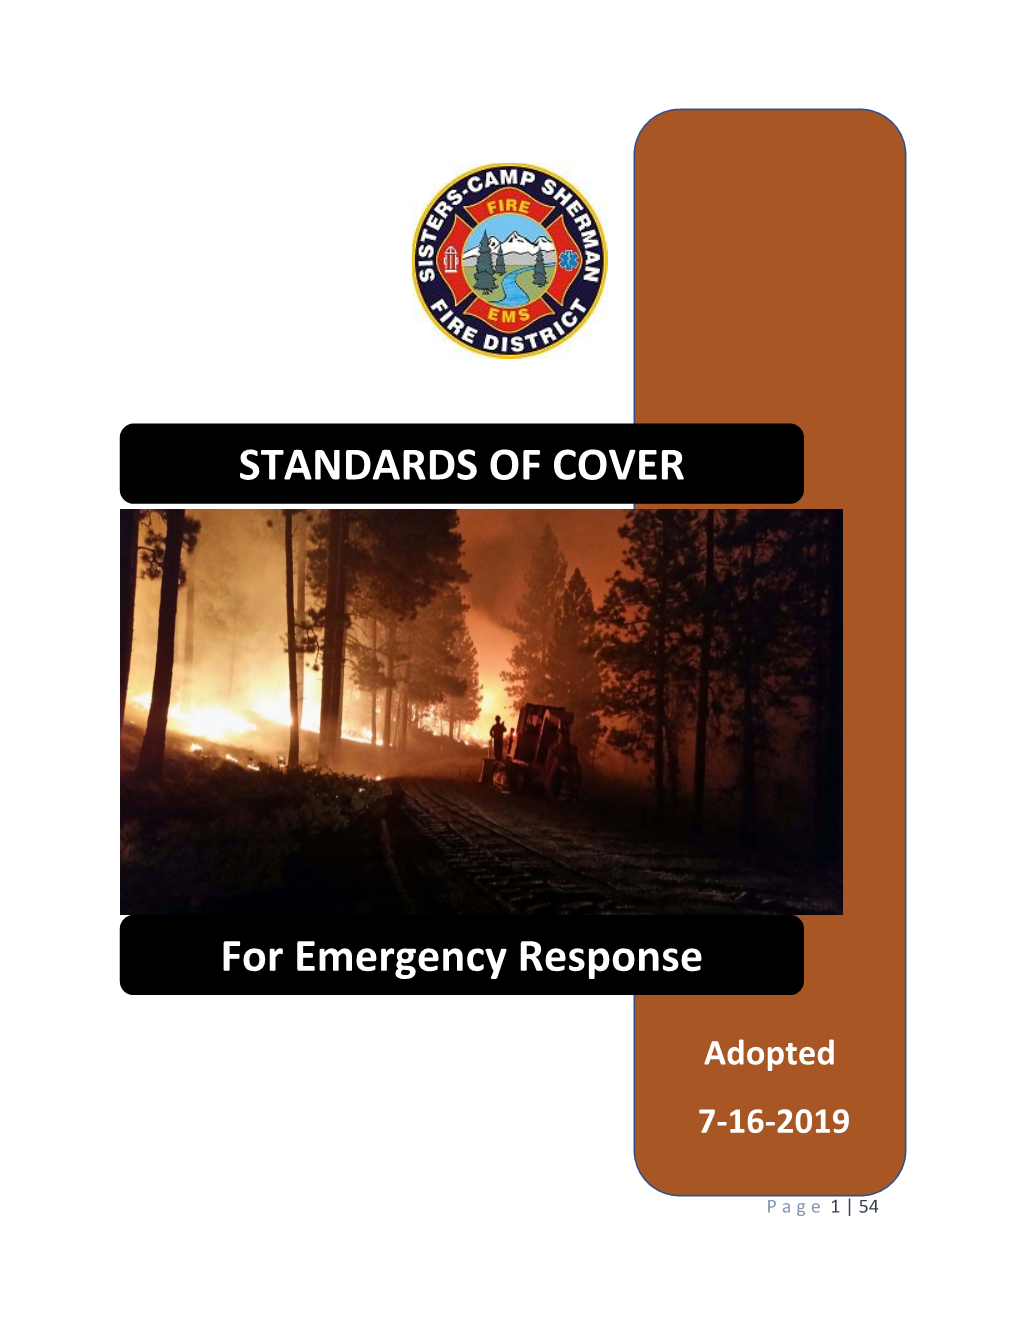 Standards of Cover for Emergency Response (SOC) in 2013